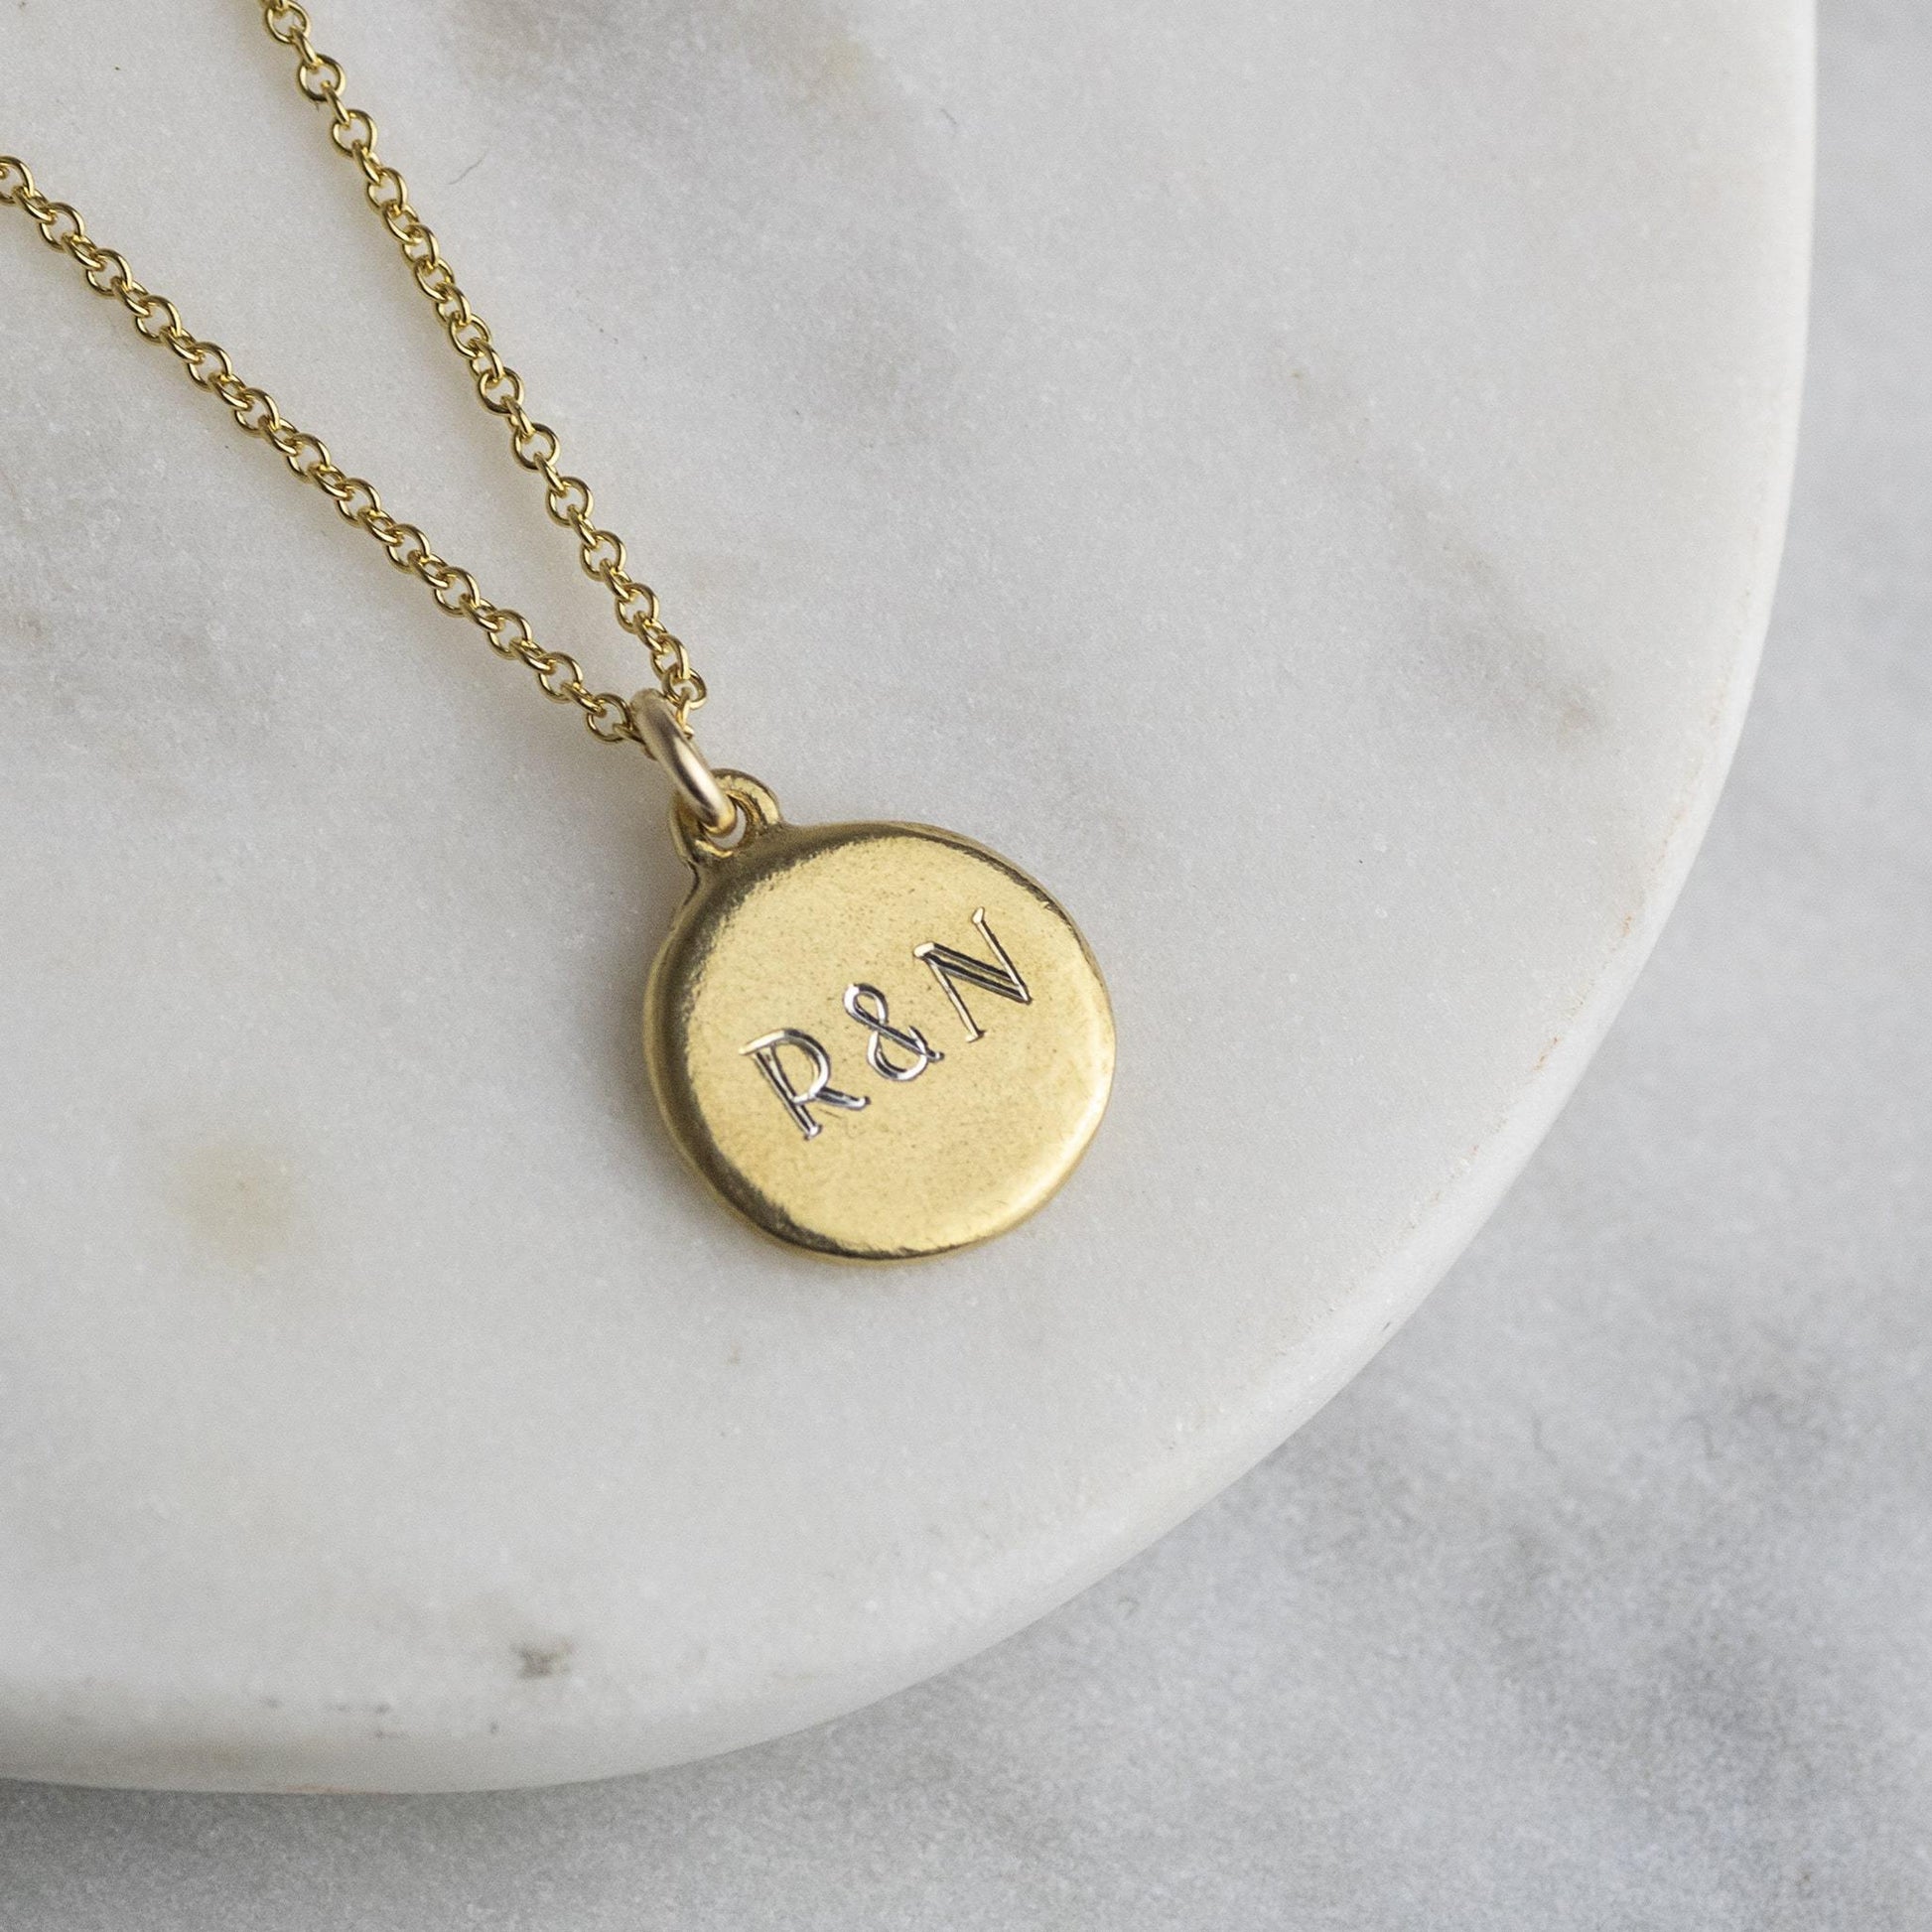 Personalised Initials Necklace